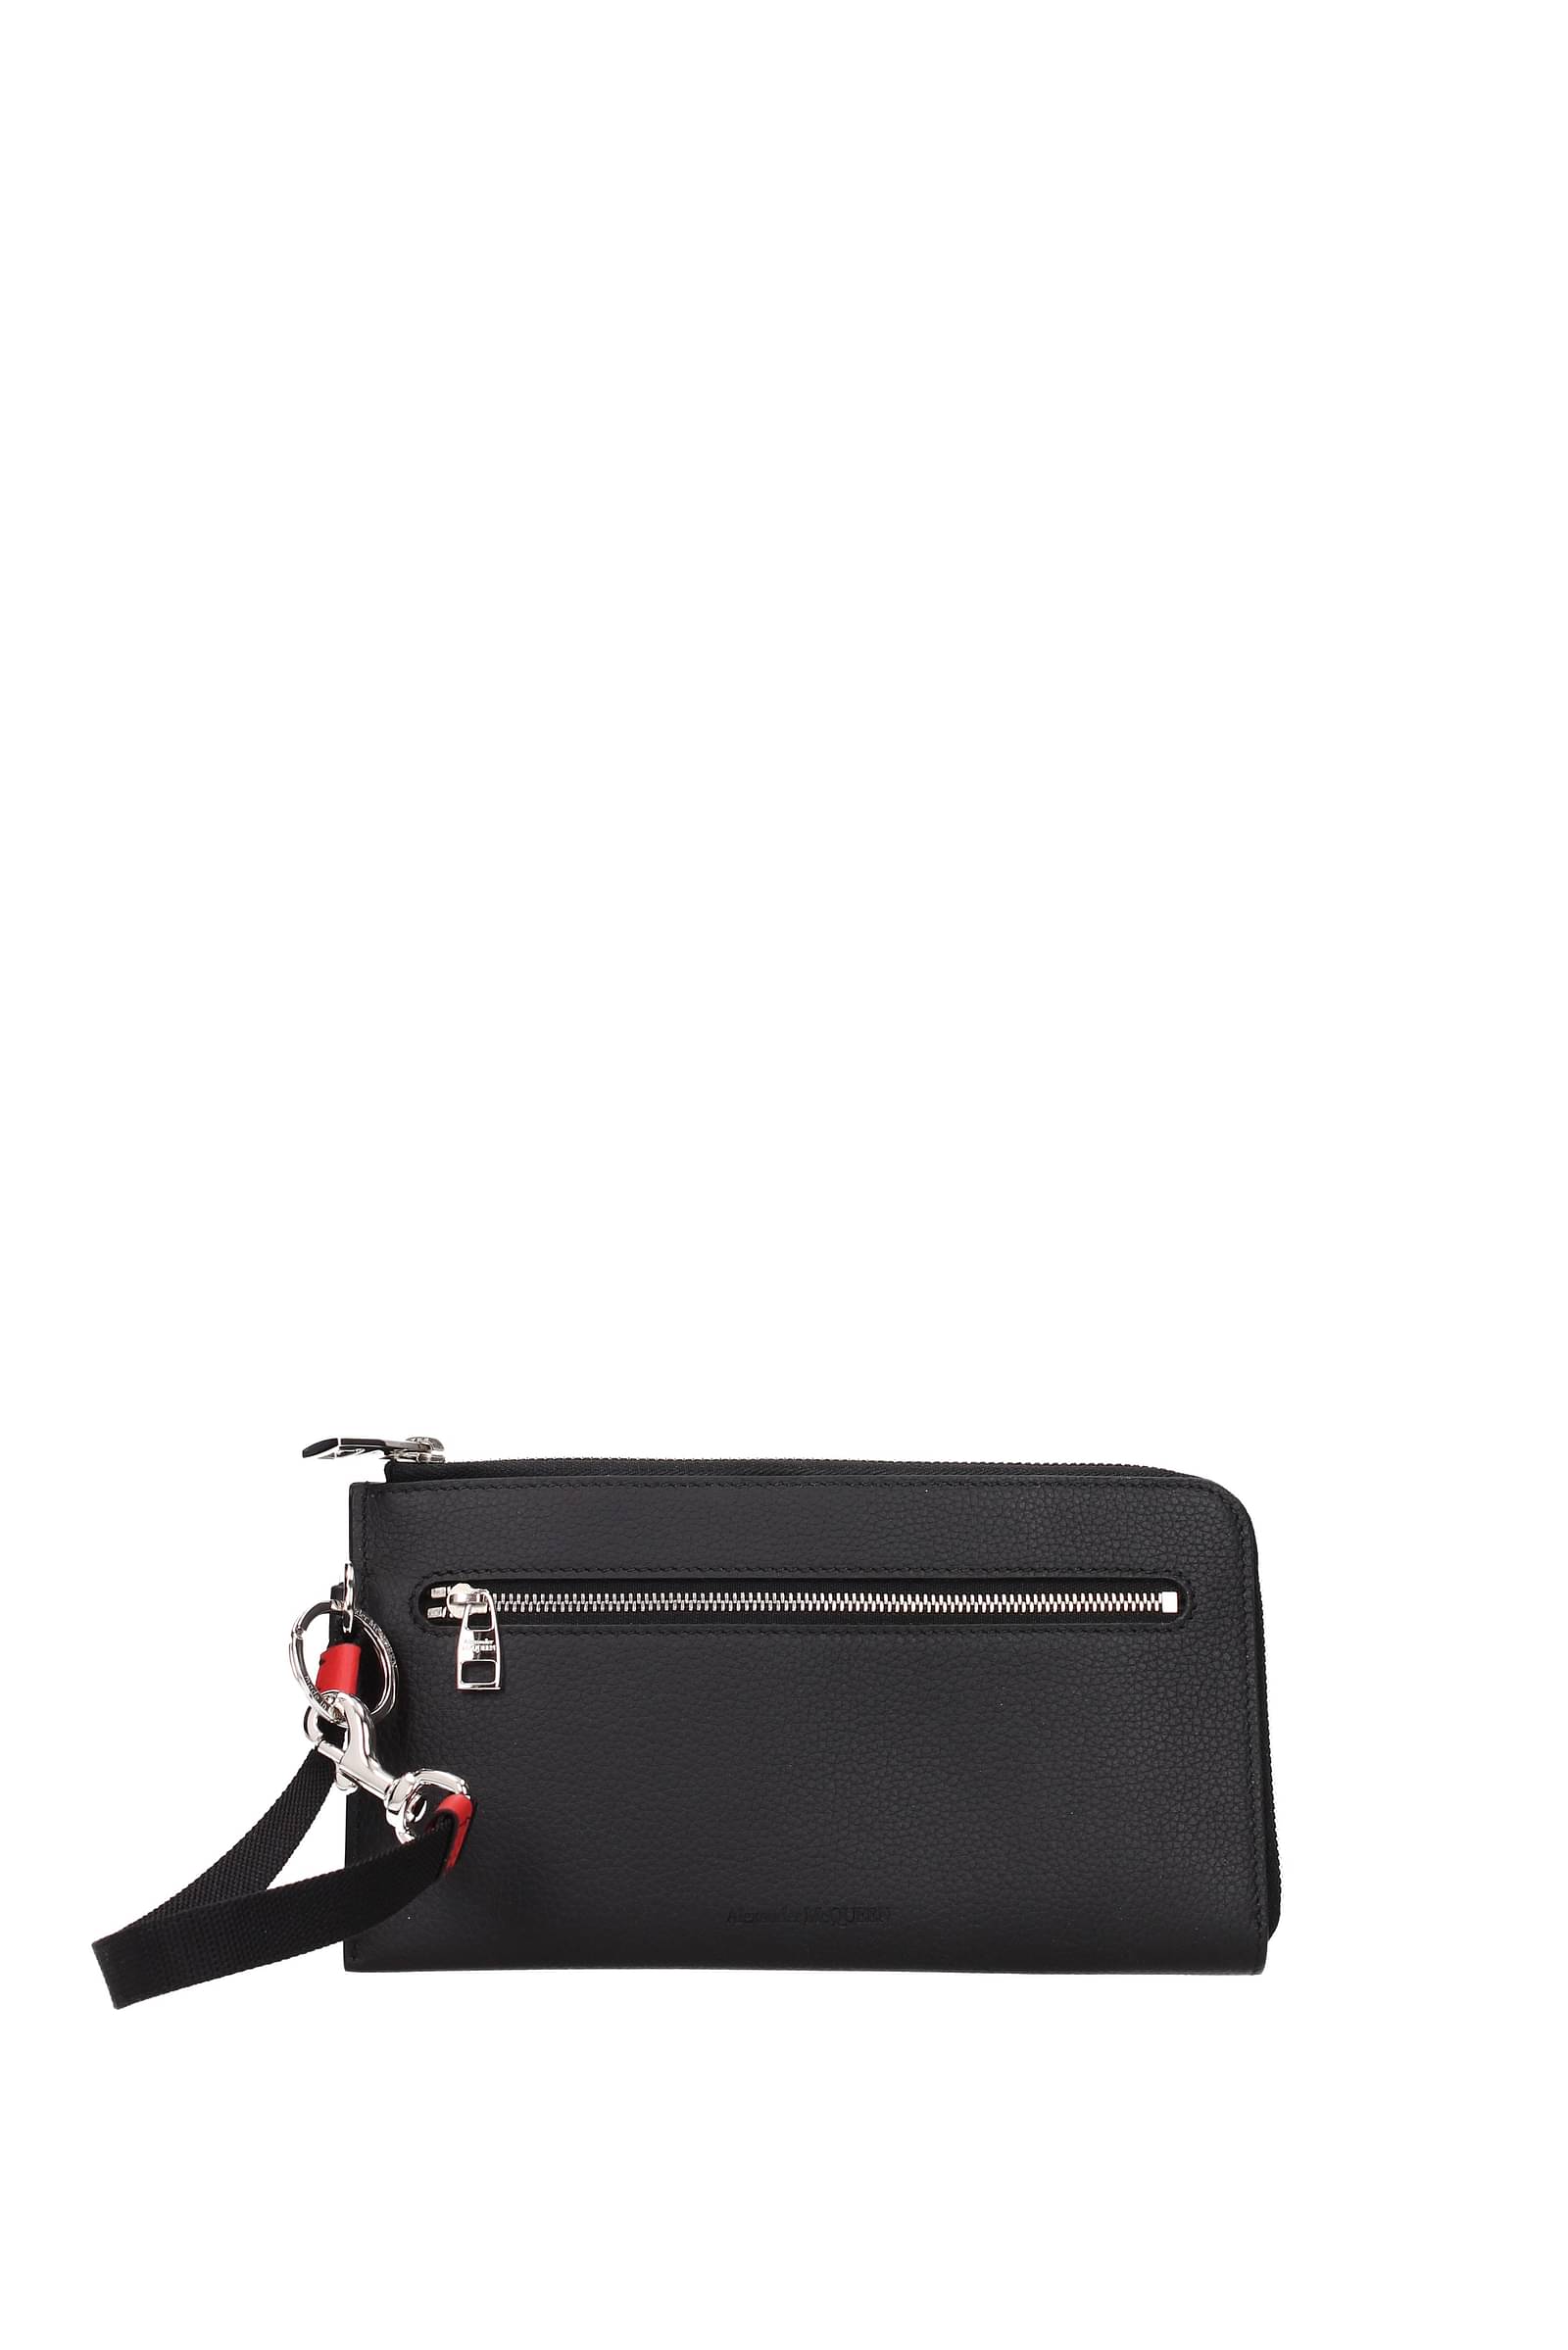 McQ Alexander McQueen bags for women in the Sale | Save online with ZALANDO